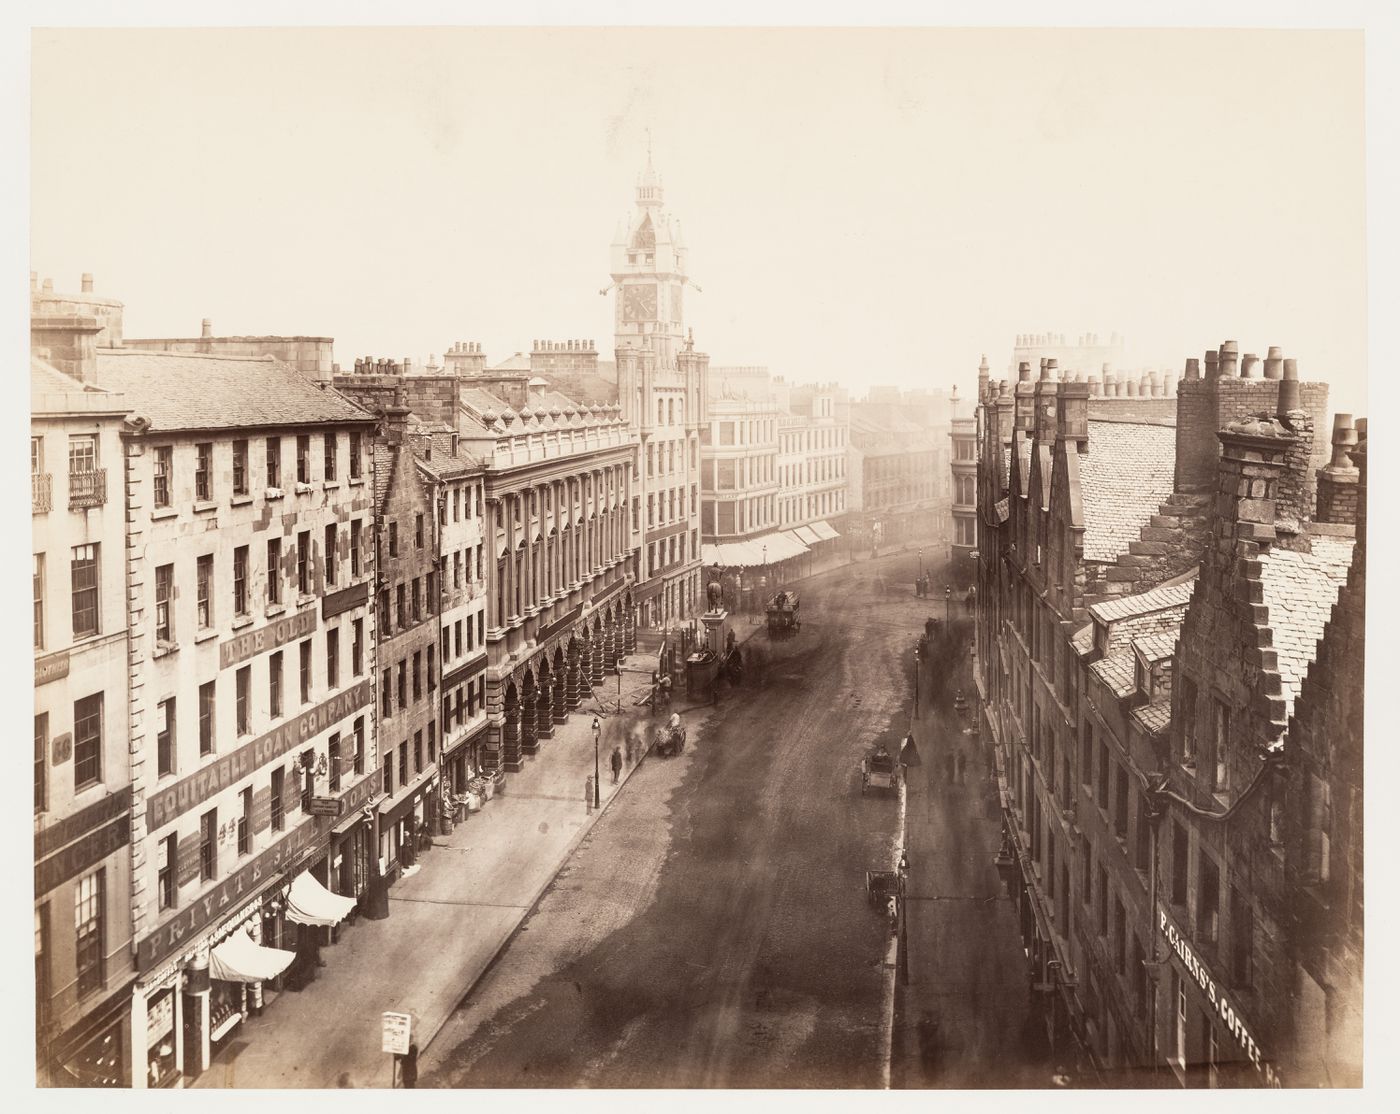 Exterior view of Trongate [street] from Tron Steeple with Tolbooth Steeple in the background, Glasgow, Scotland